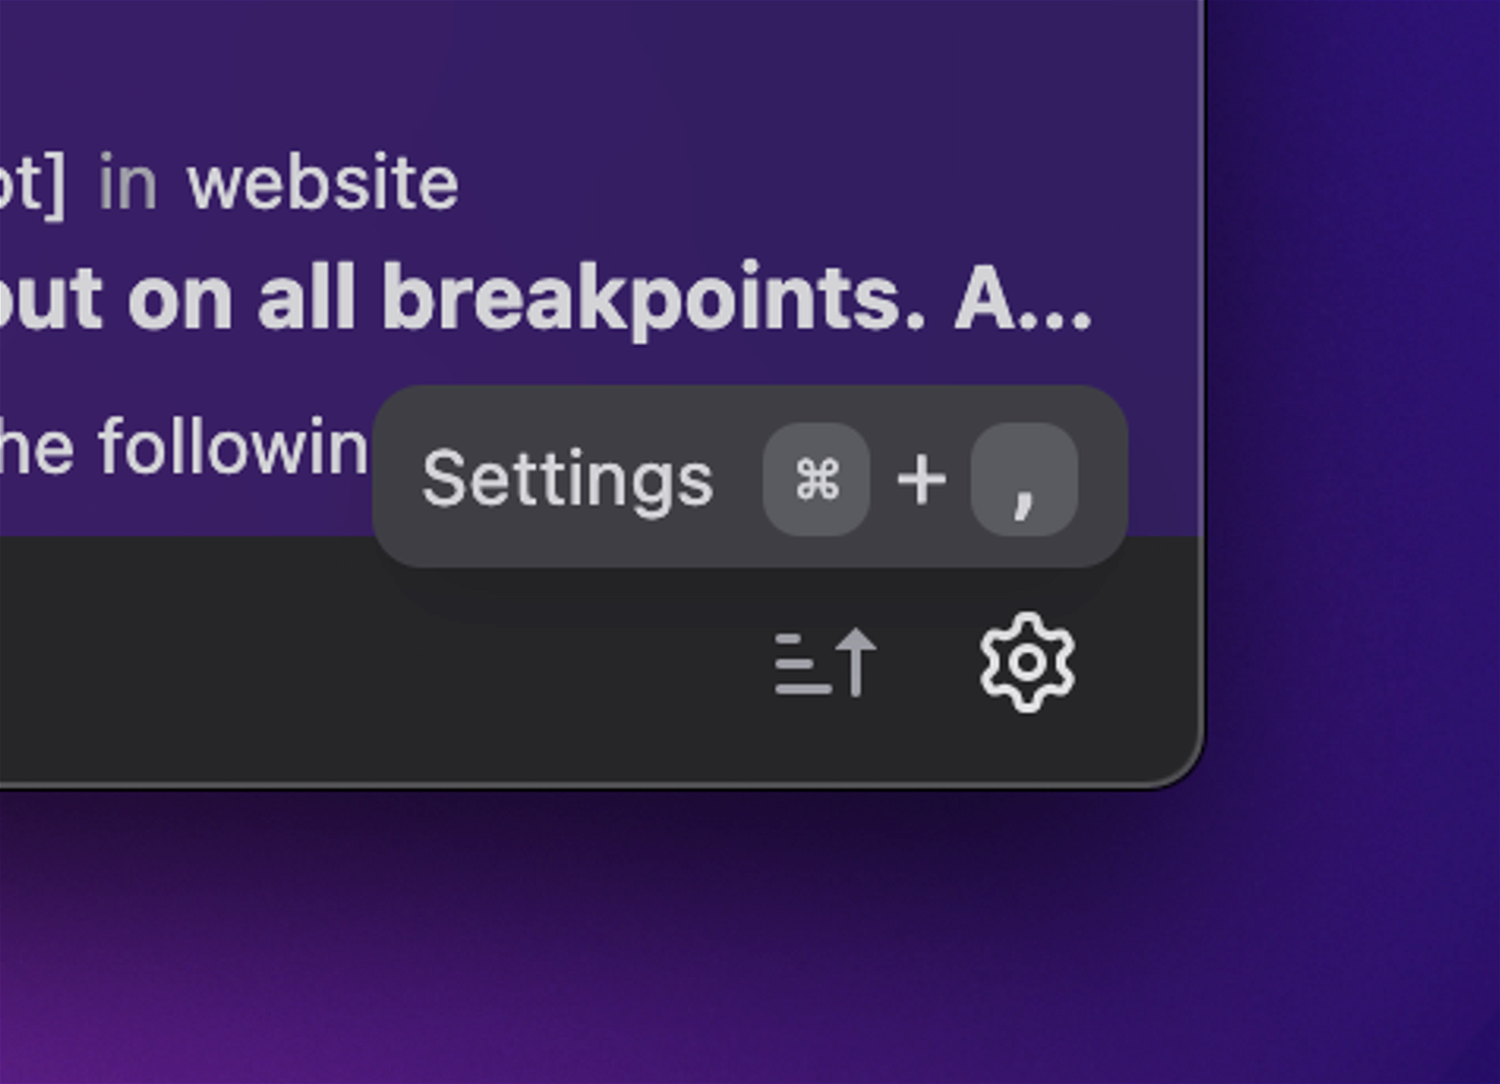 Faster tooltips with keyboard shortcuts are one feature of this release.